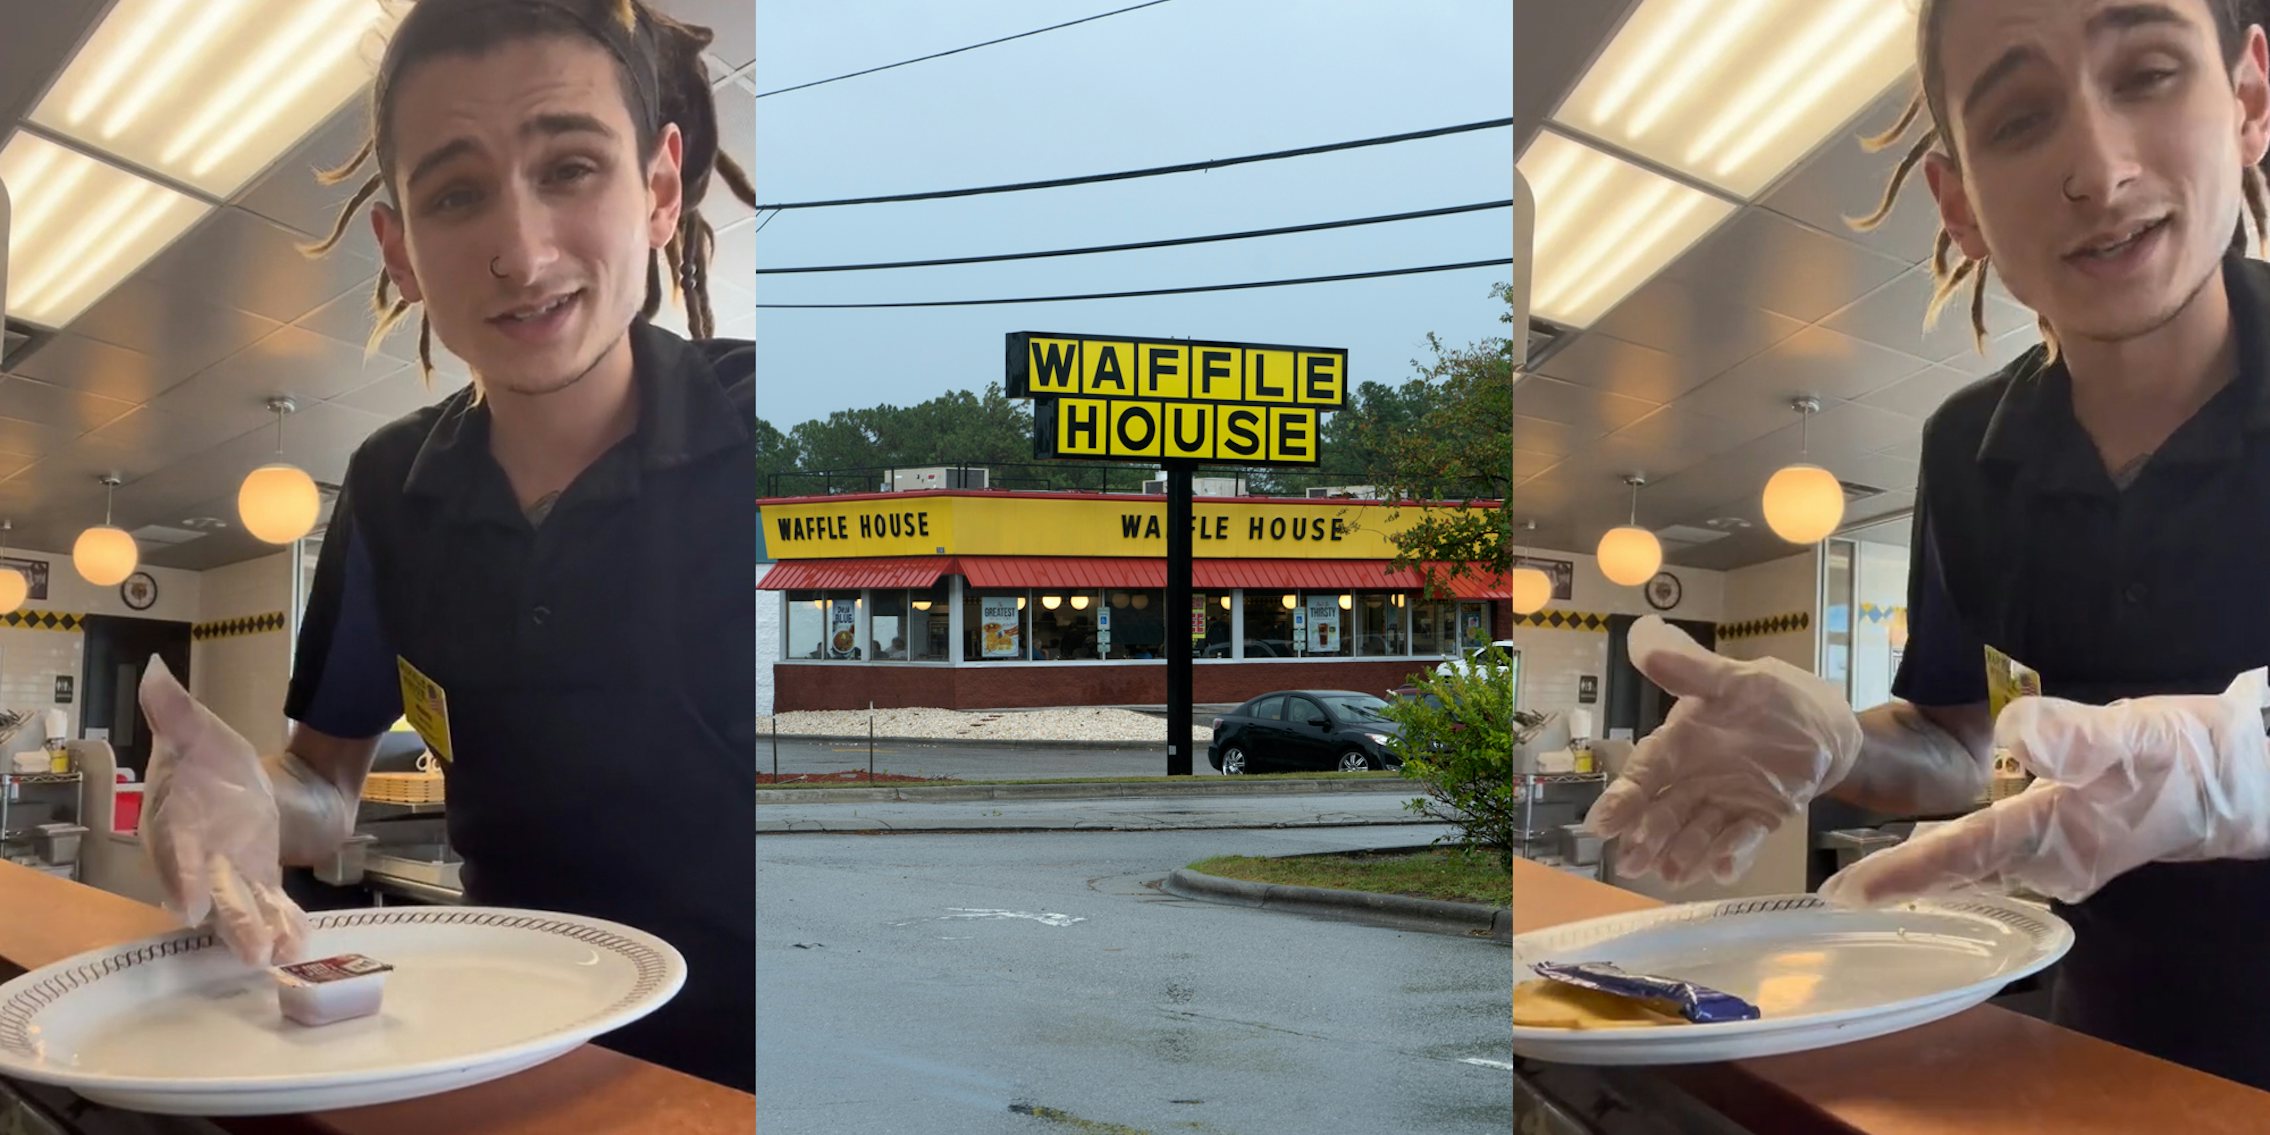 Waffle House employee speaking with hand pointing to jelly on plate (l) Waffle House building with sign (c) Waffle House employee pointing to sauce packet and cheese on plate (r)